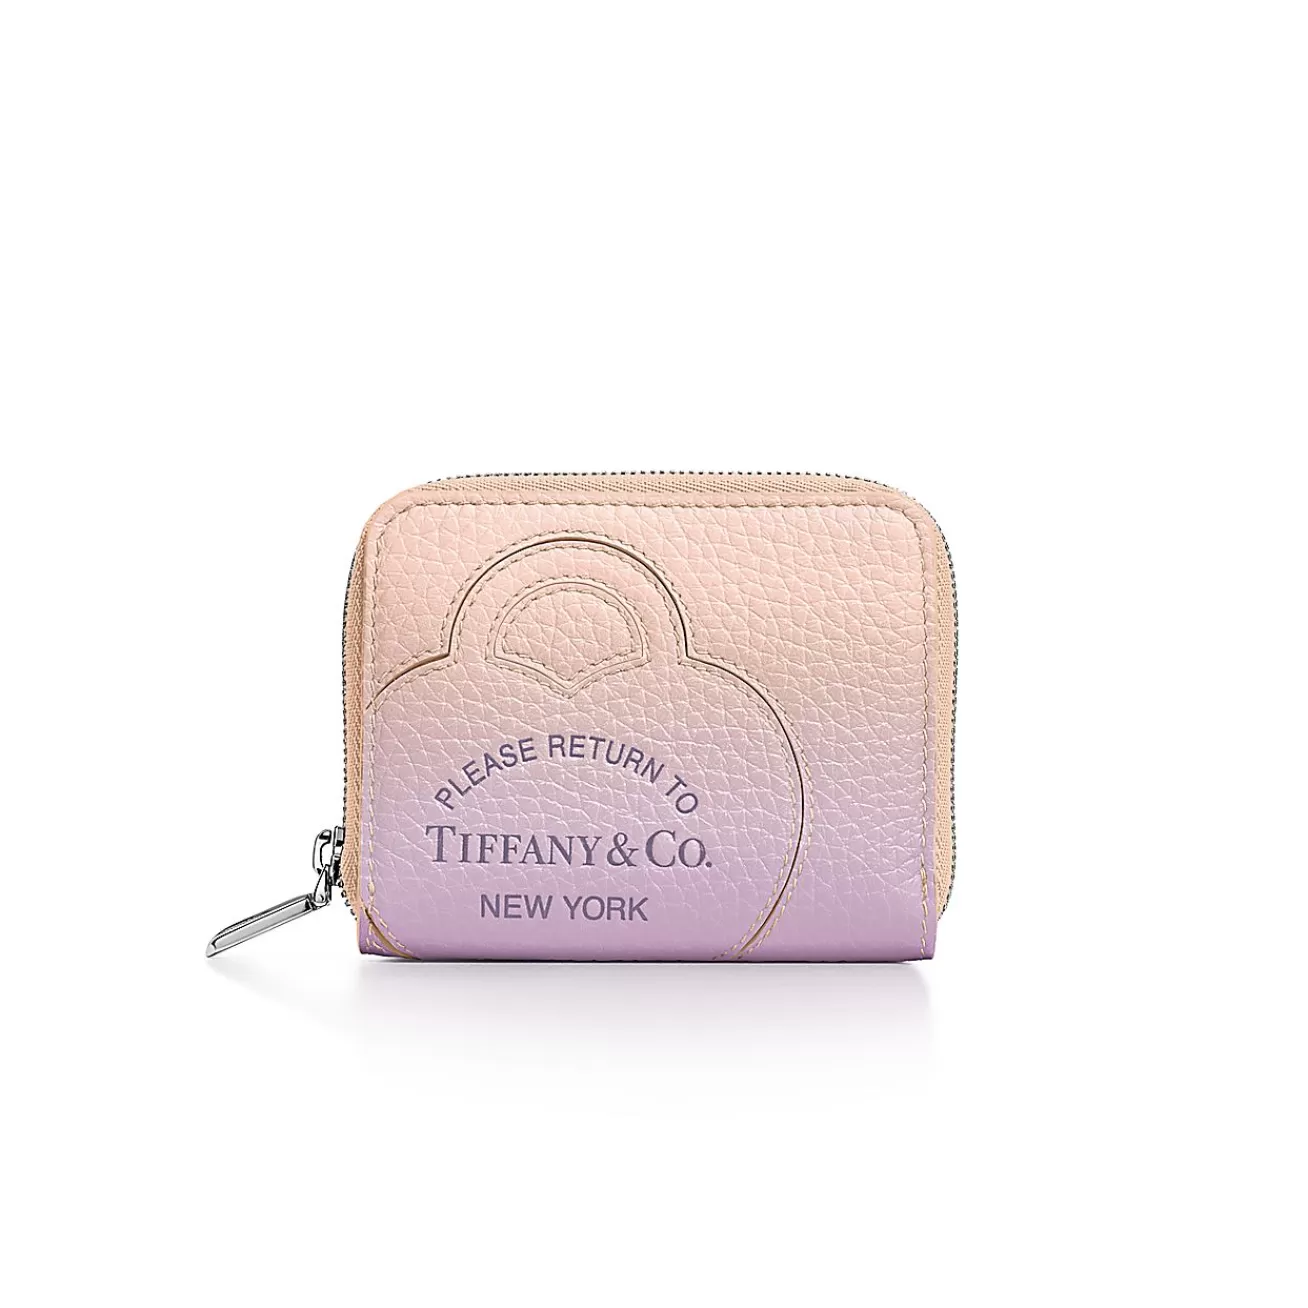 Tiffany & Co. Return to Tiffany® Small Zip Wallet in Infinity Morganite Leather | ^Women Small Leather Goods | Women's Accessories